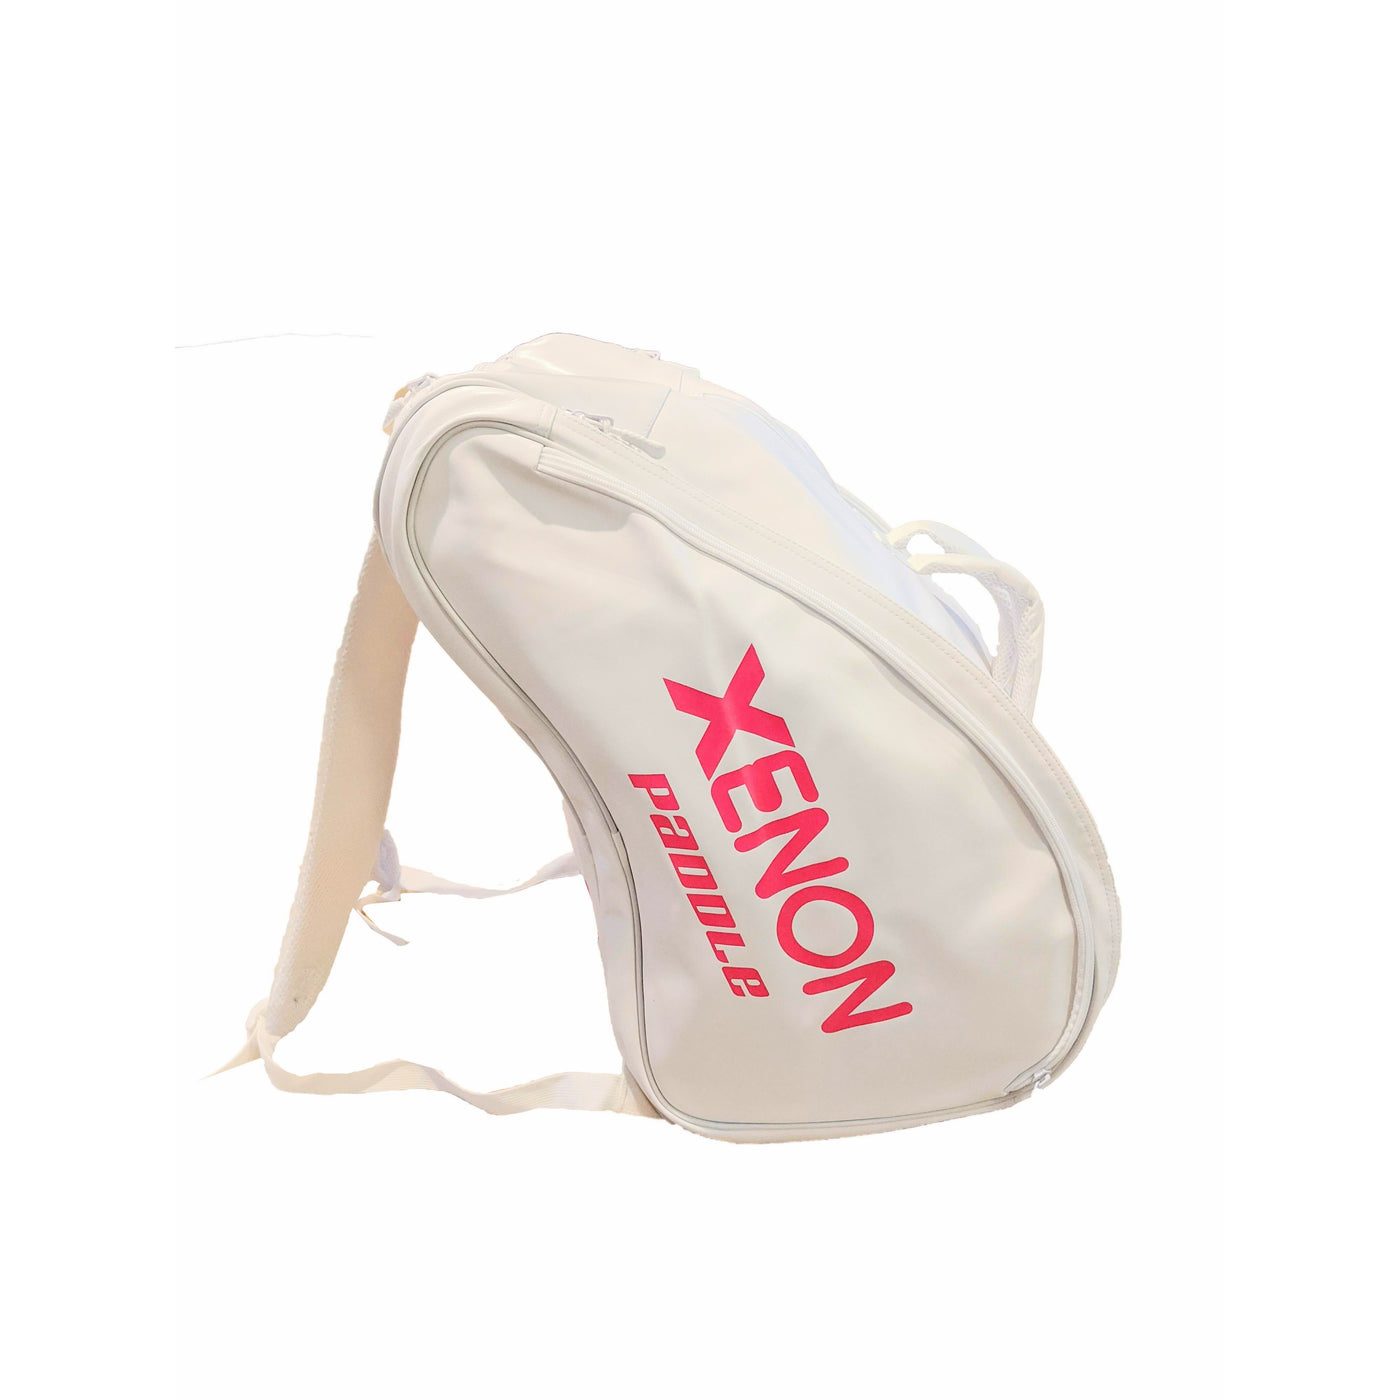 Xenon Paddle Tennis carry bag white pink backpack